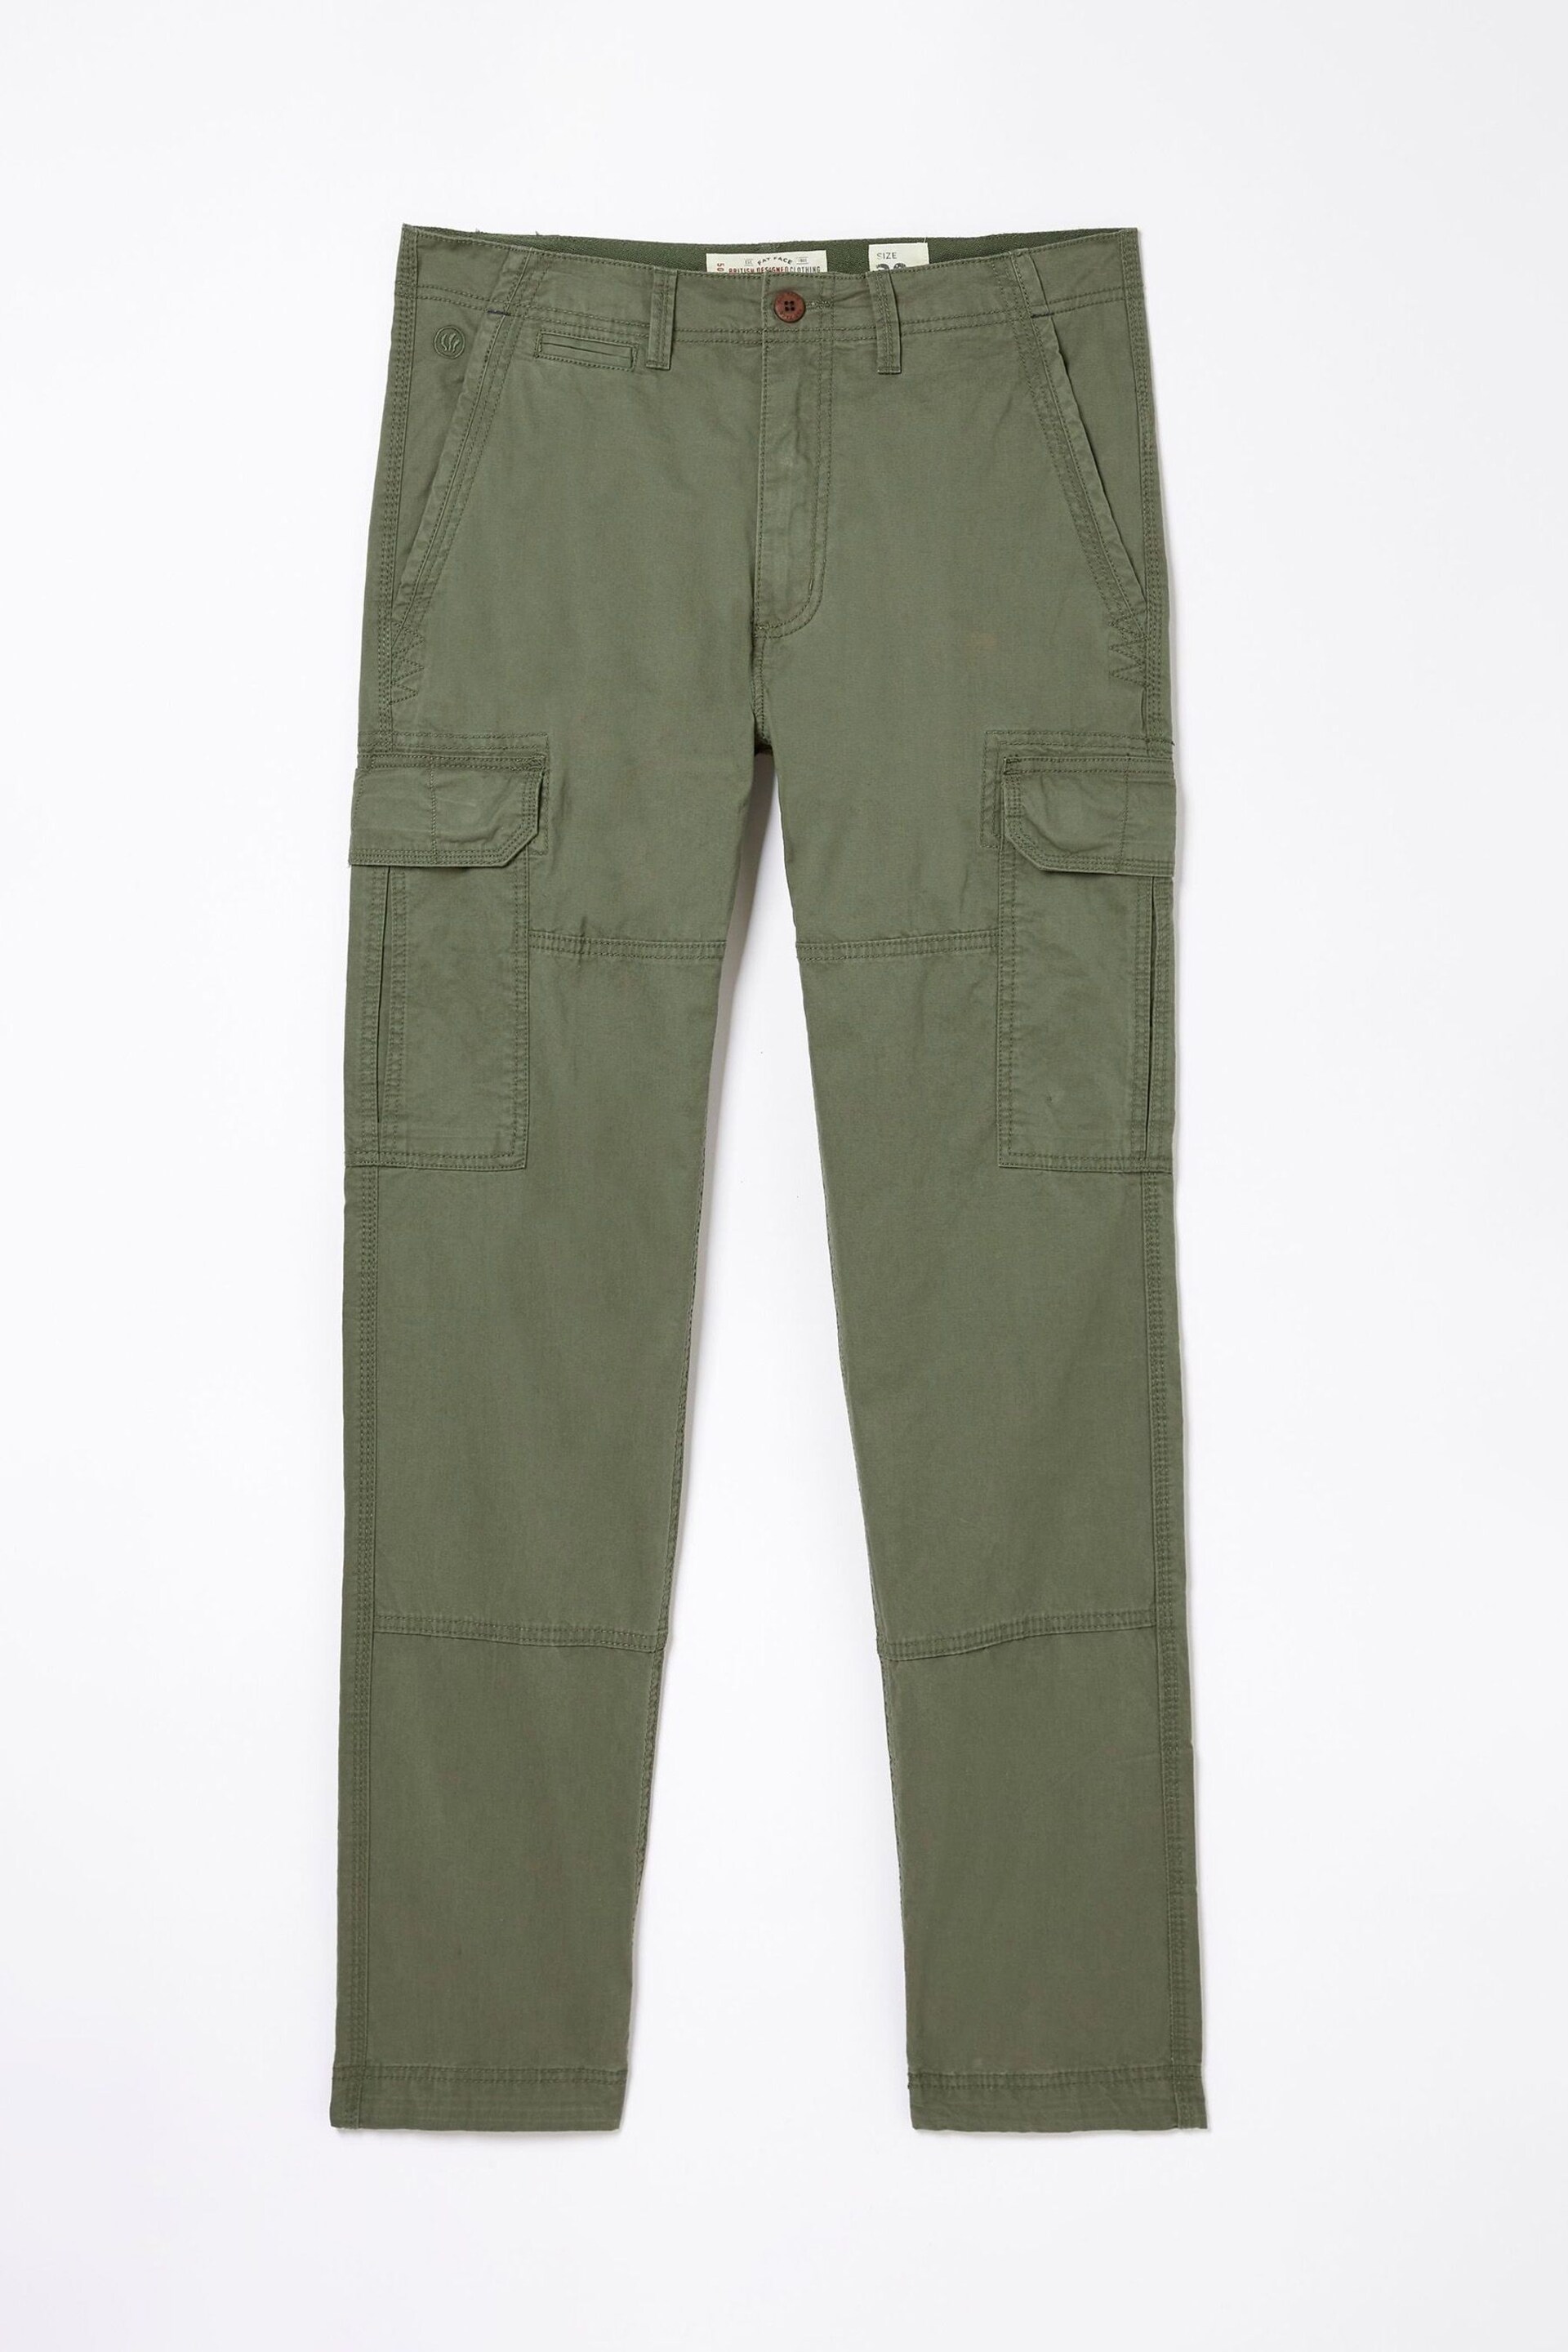 FatFace Green Ripstop Cargo Trousers - Image 5 of 5